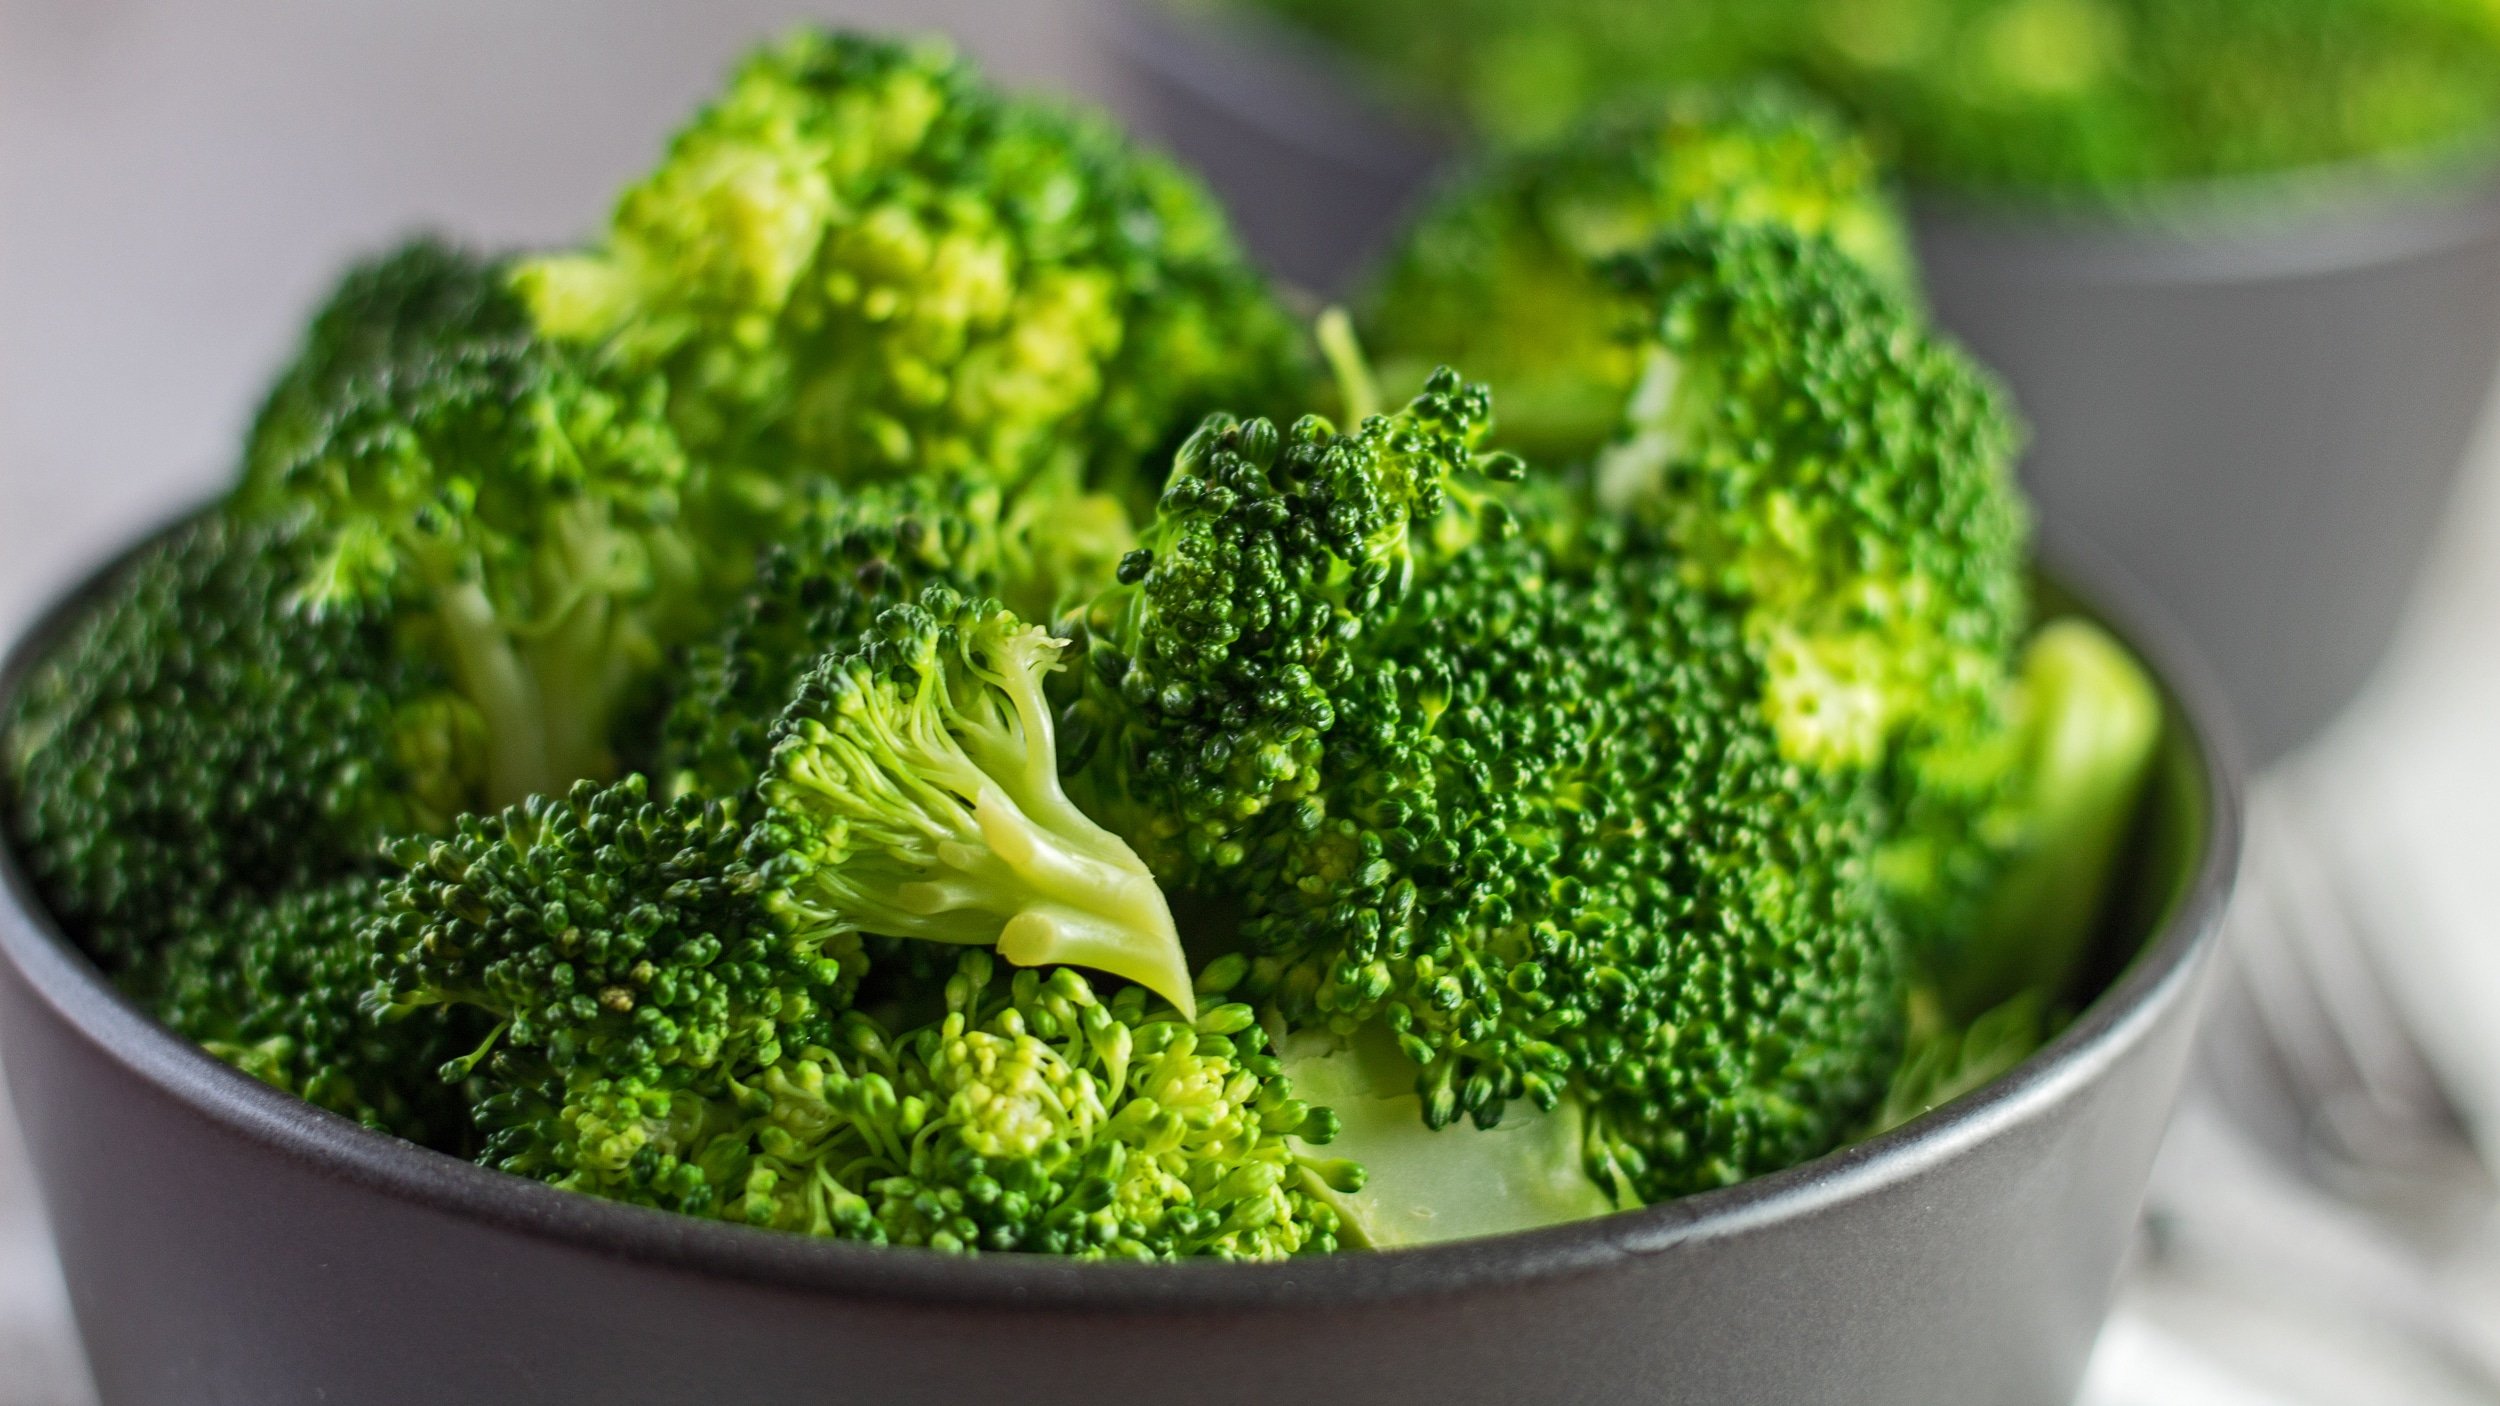 https://bakeitwithlove.com/wp-content/uploads/2021/04/Microwave-Steamed-Broccoli-h.jpg